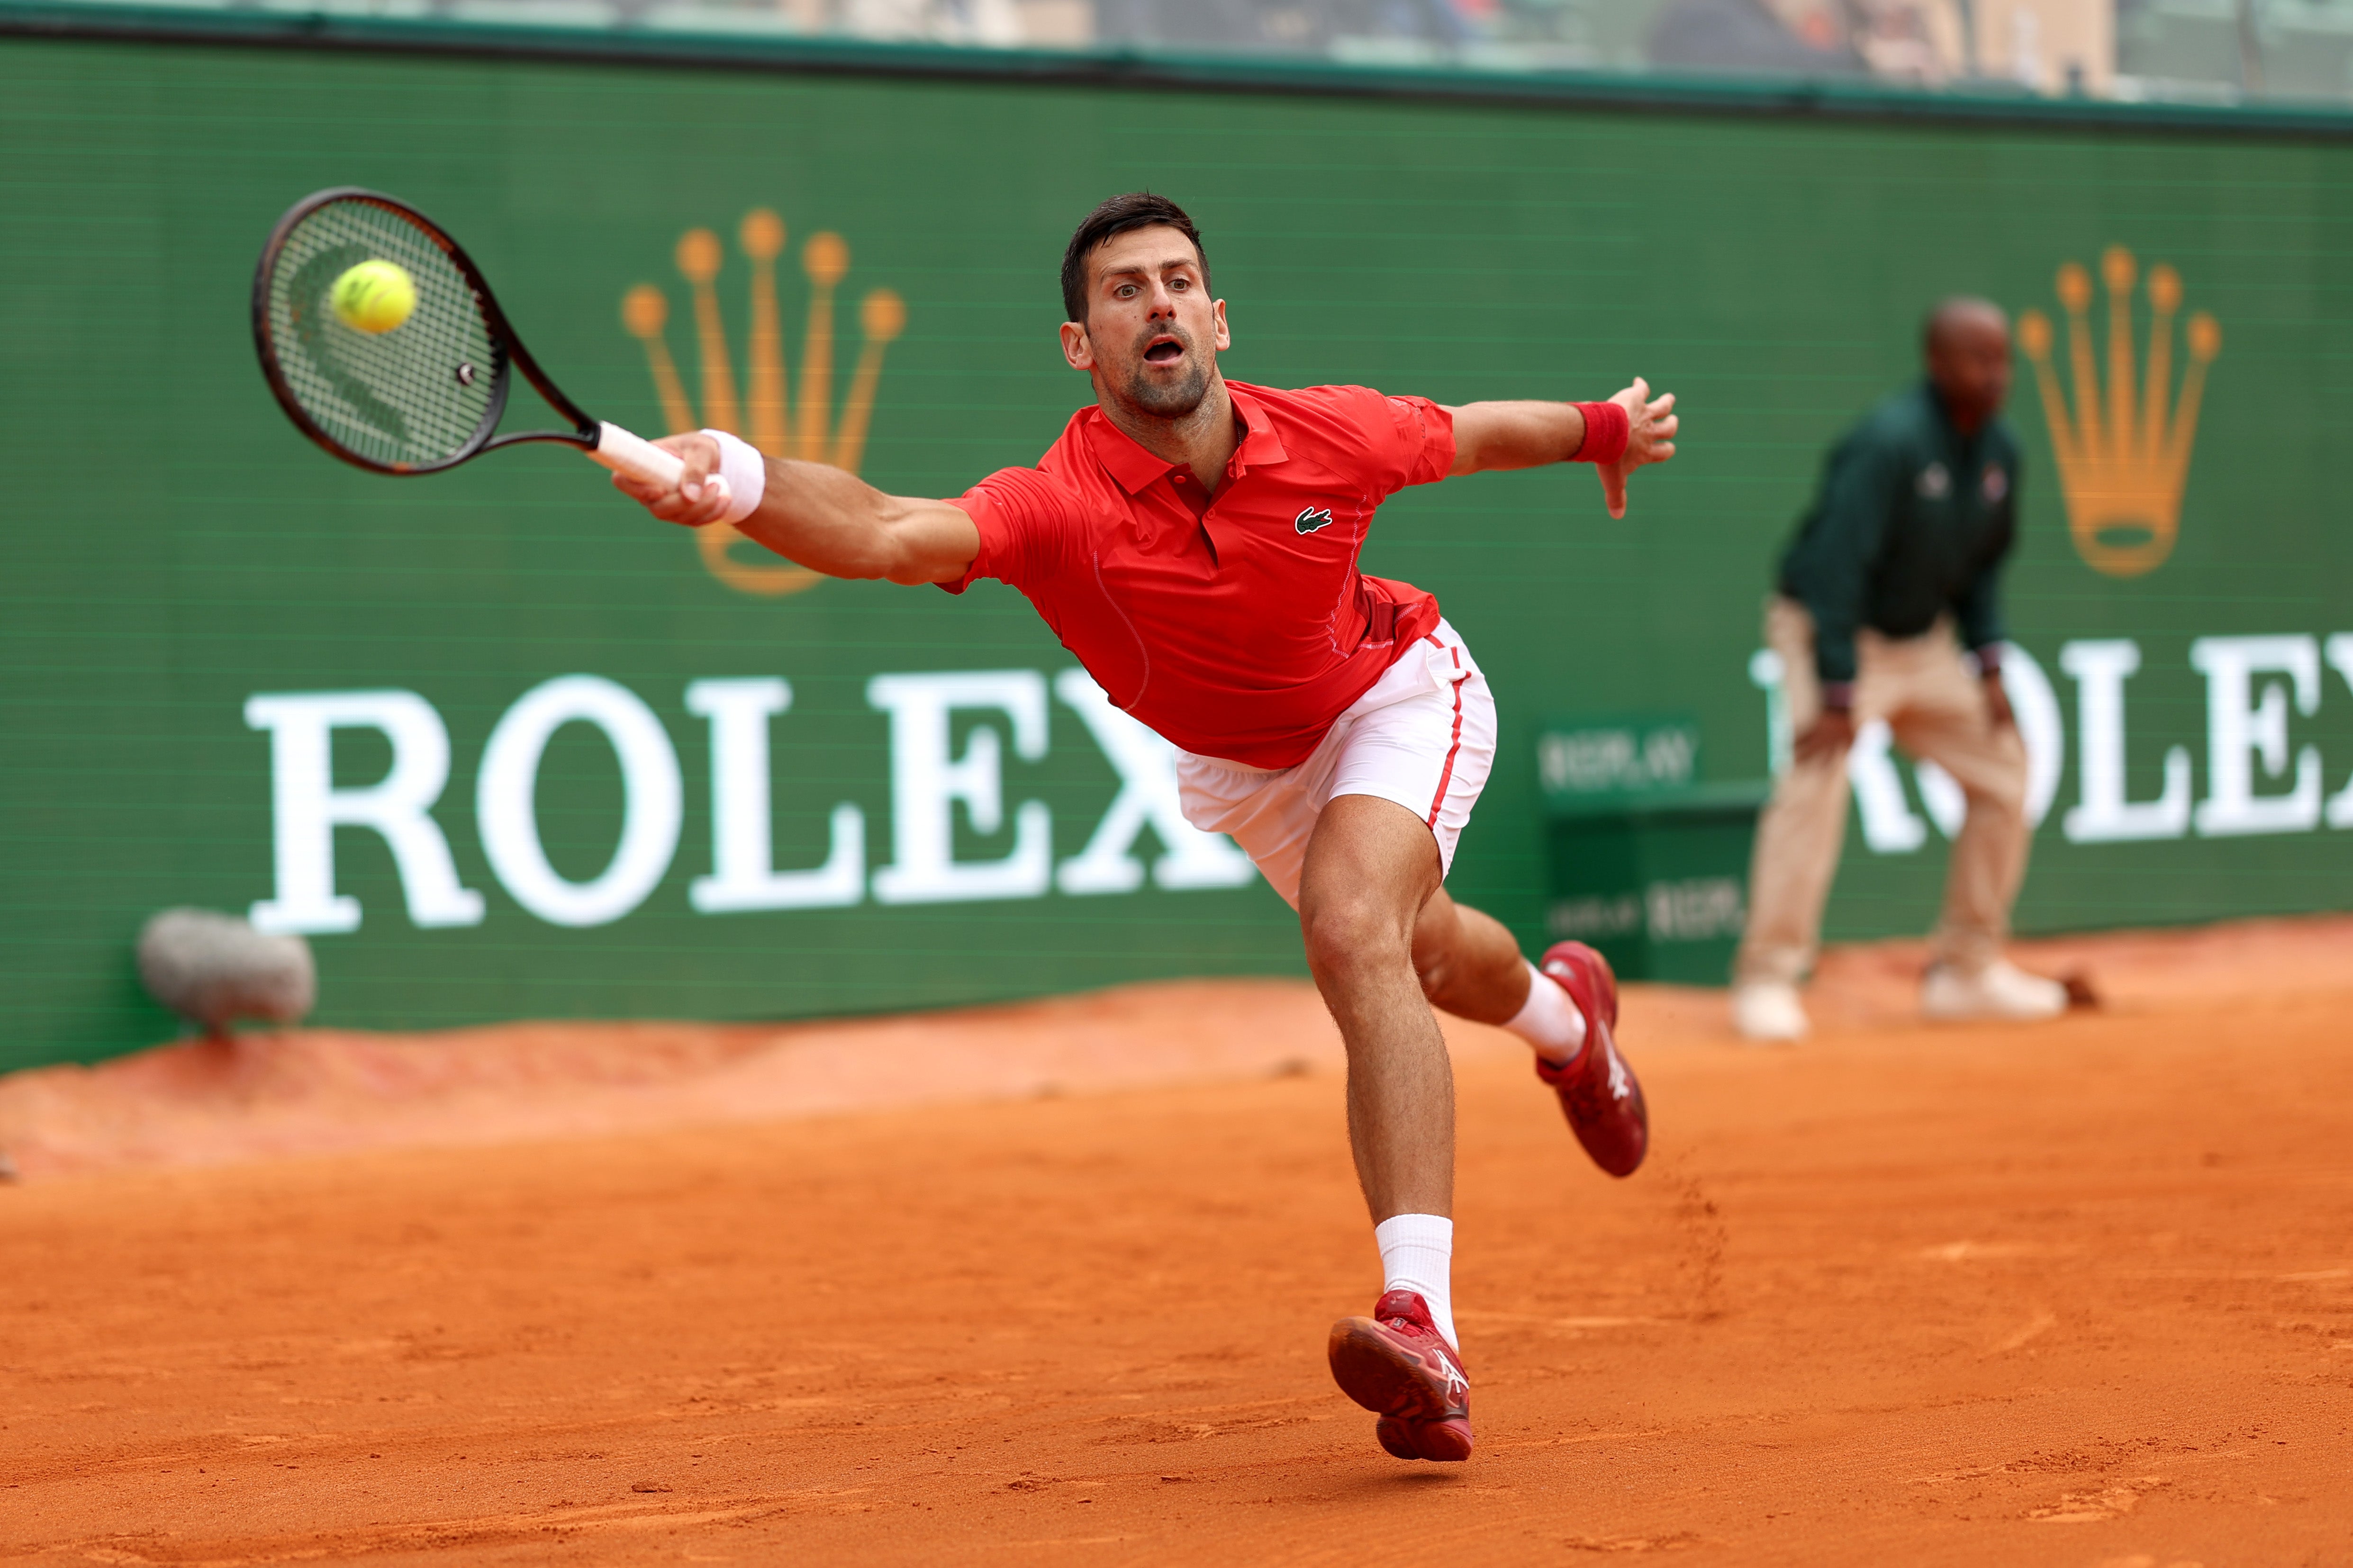 Novak Djokovic advanced in style at the Monte Carlo Masters